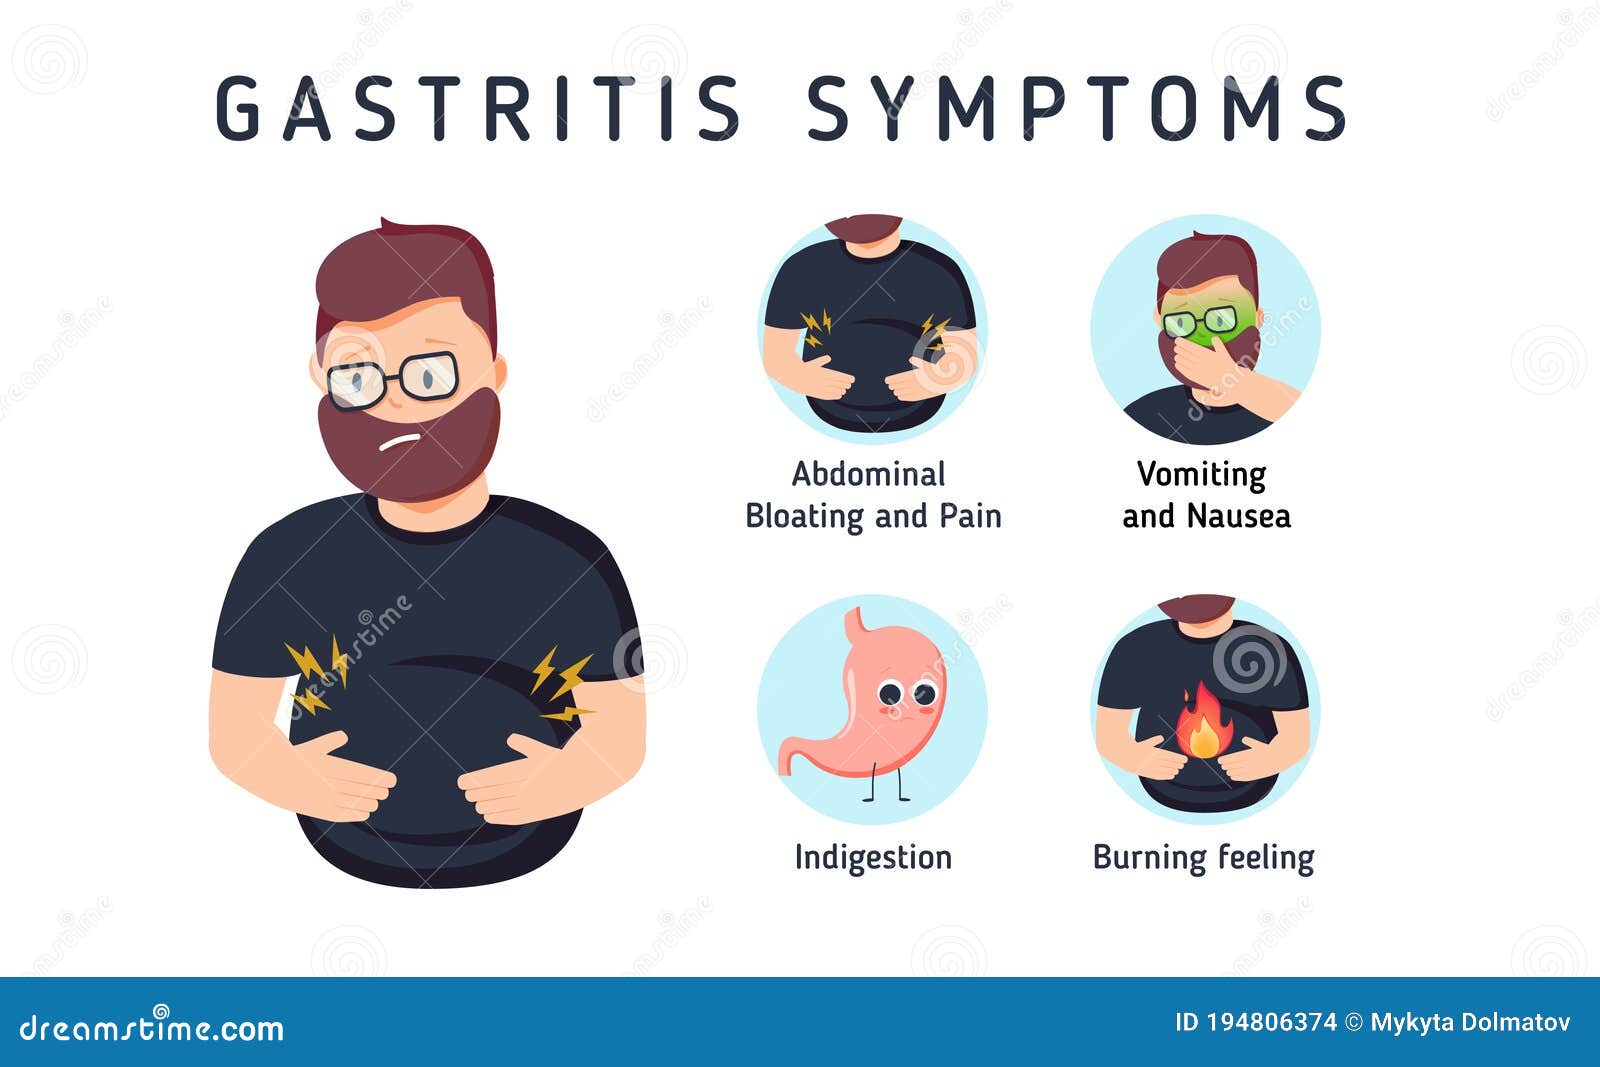 gastritis symptoms infographic. digestive system disease signs. vomiting and abdominal pain, nausea and burning feeling